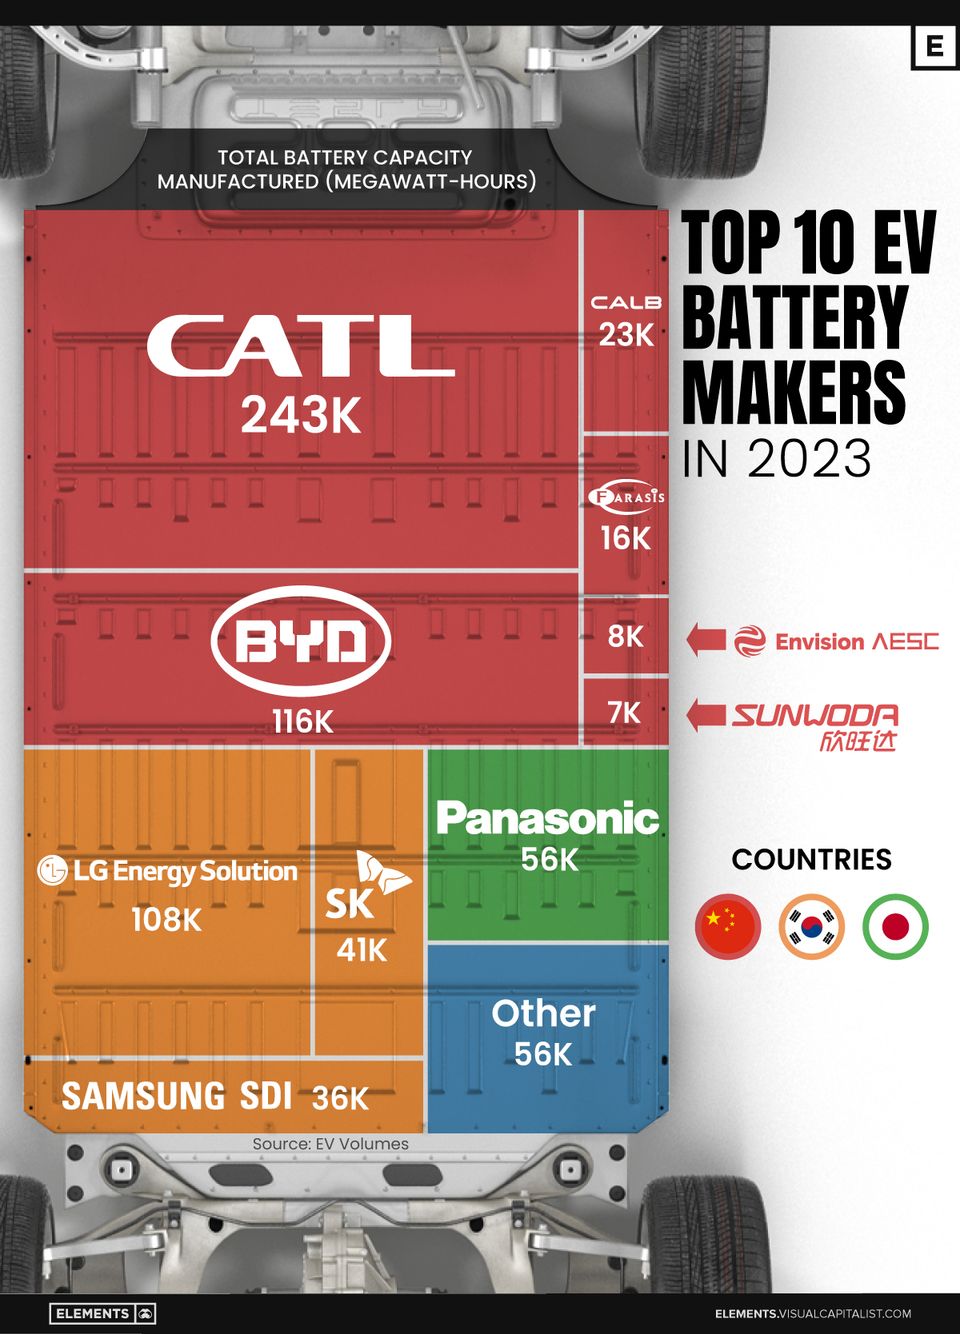 The Top 10 EV Battery Manufacturers in 2023